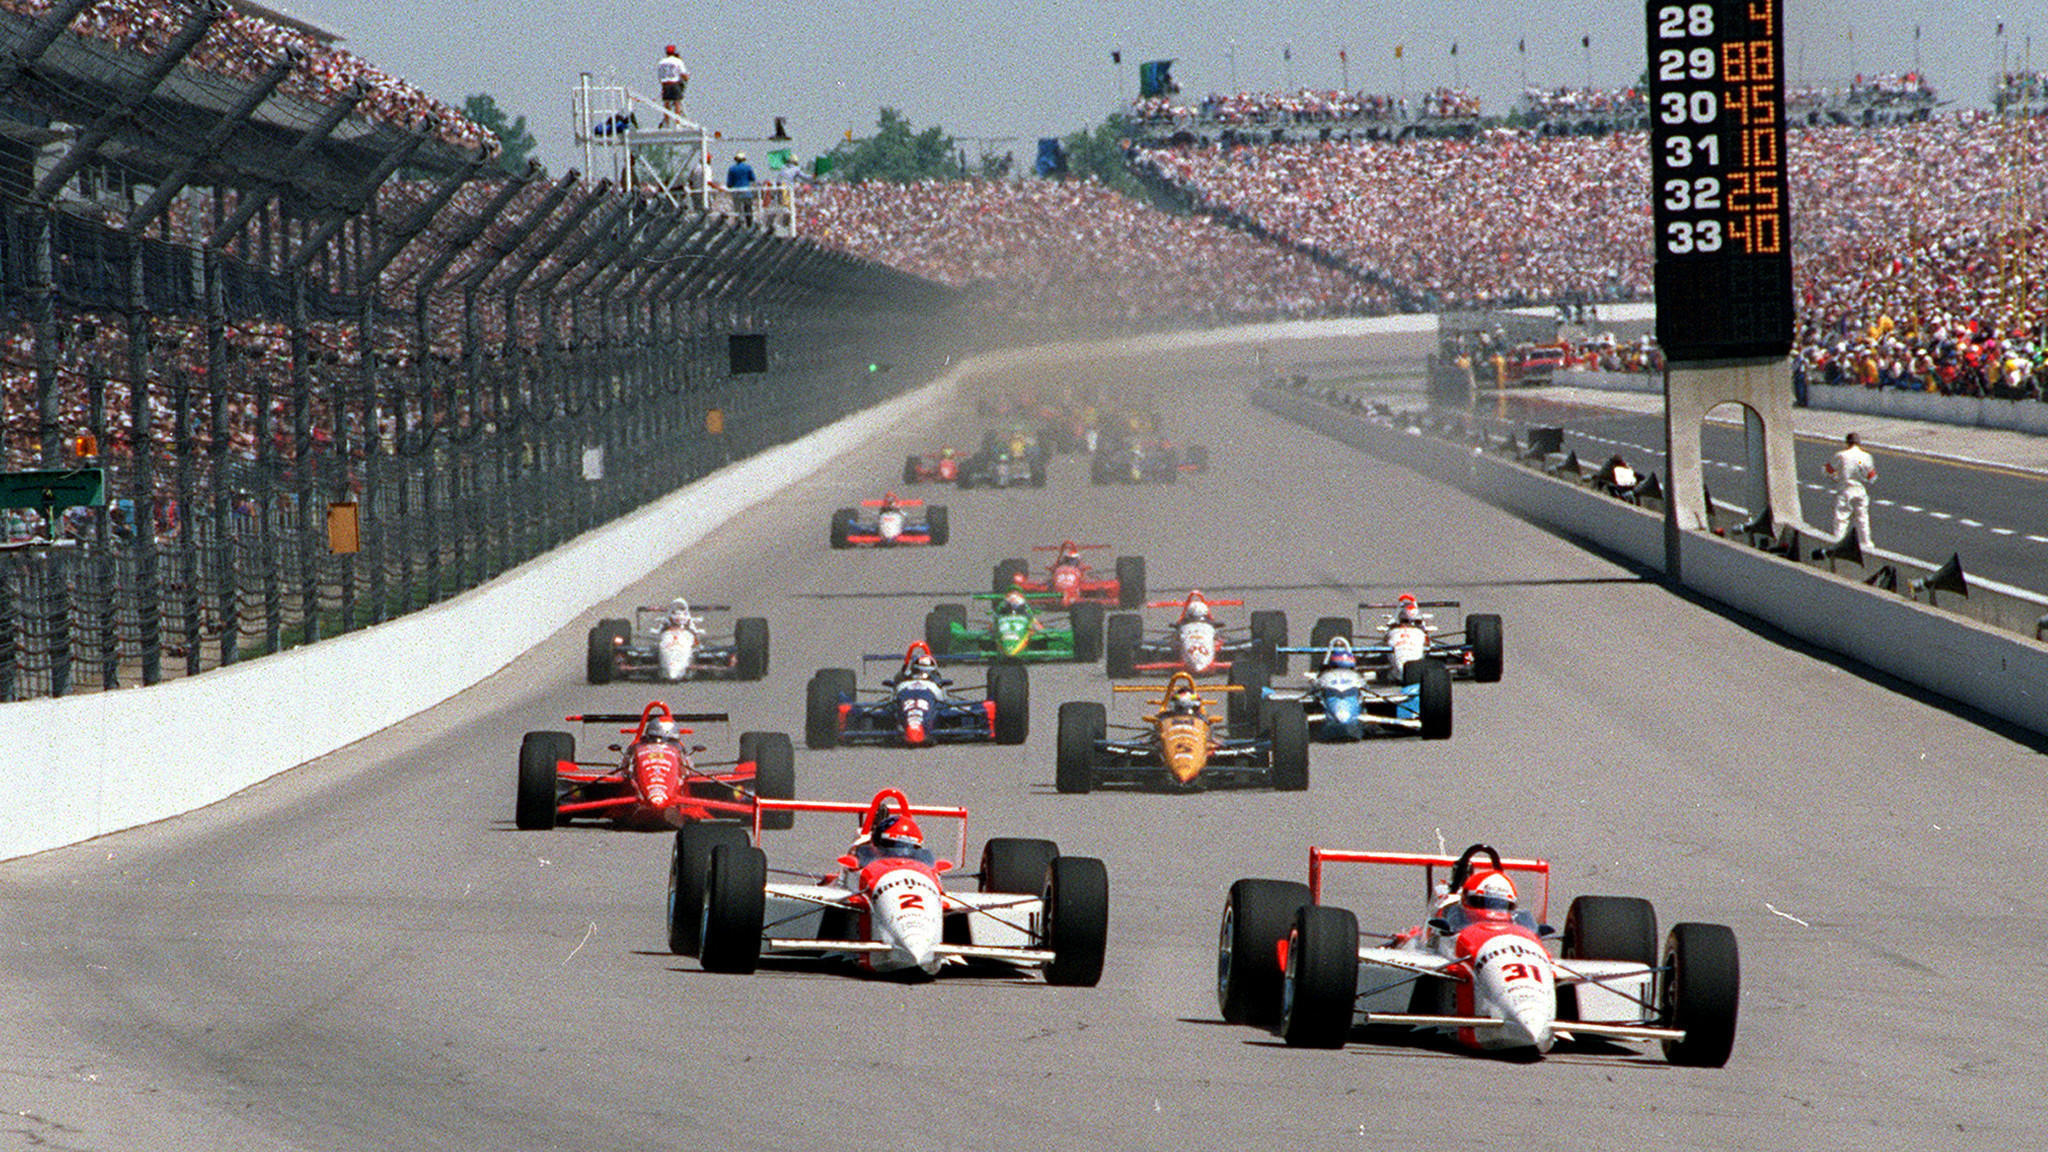 Indy 500 Update: Who Is Currently Leading The Race?